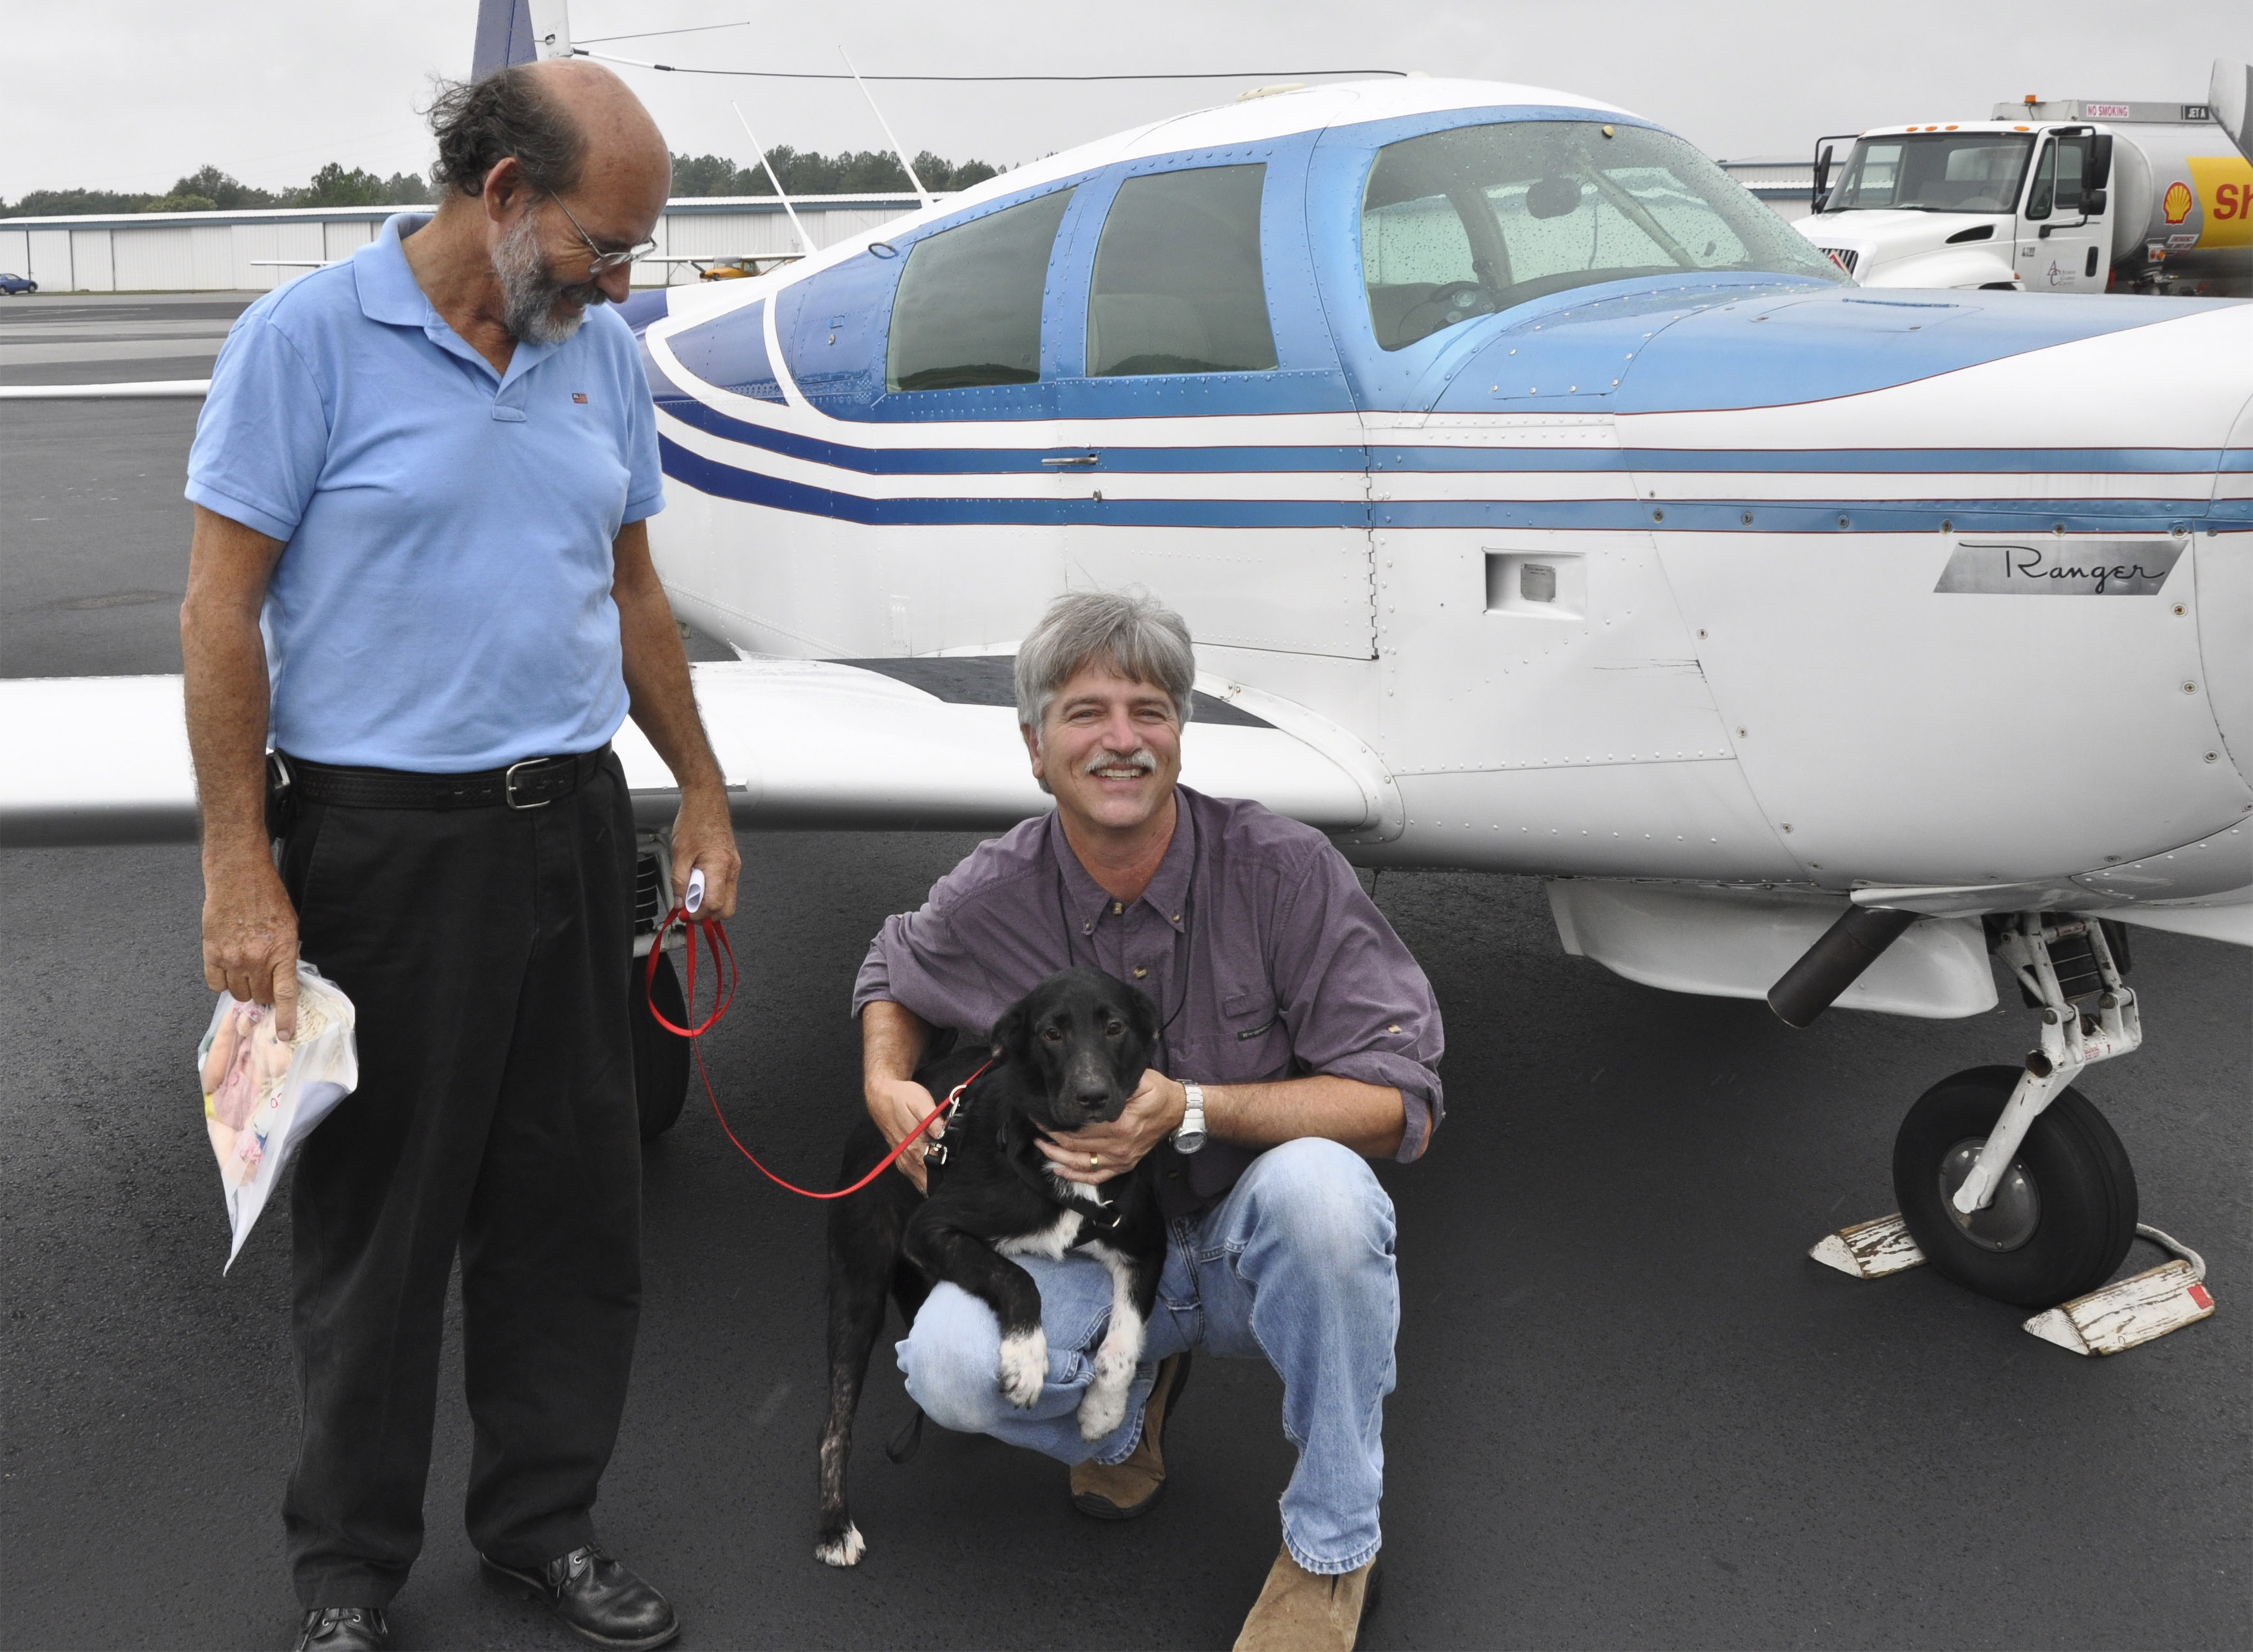 Pilot David Tulis and Skybound Aviation flight instructor Michael O'Neal of Atlanta prepare to transport a border collie named Oreo on a Pilots N Paws relocation mission in Tulis's Mooney M20C Ranger. Photo by Sabrina Sweeney-Garcia.